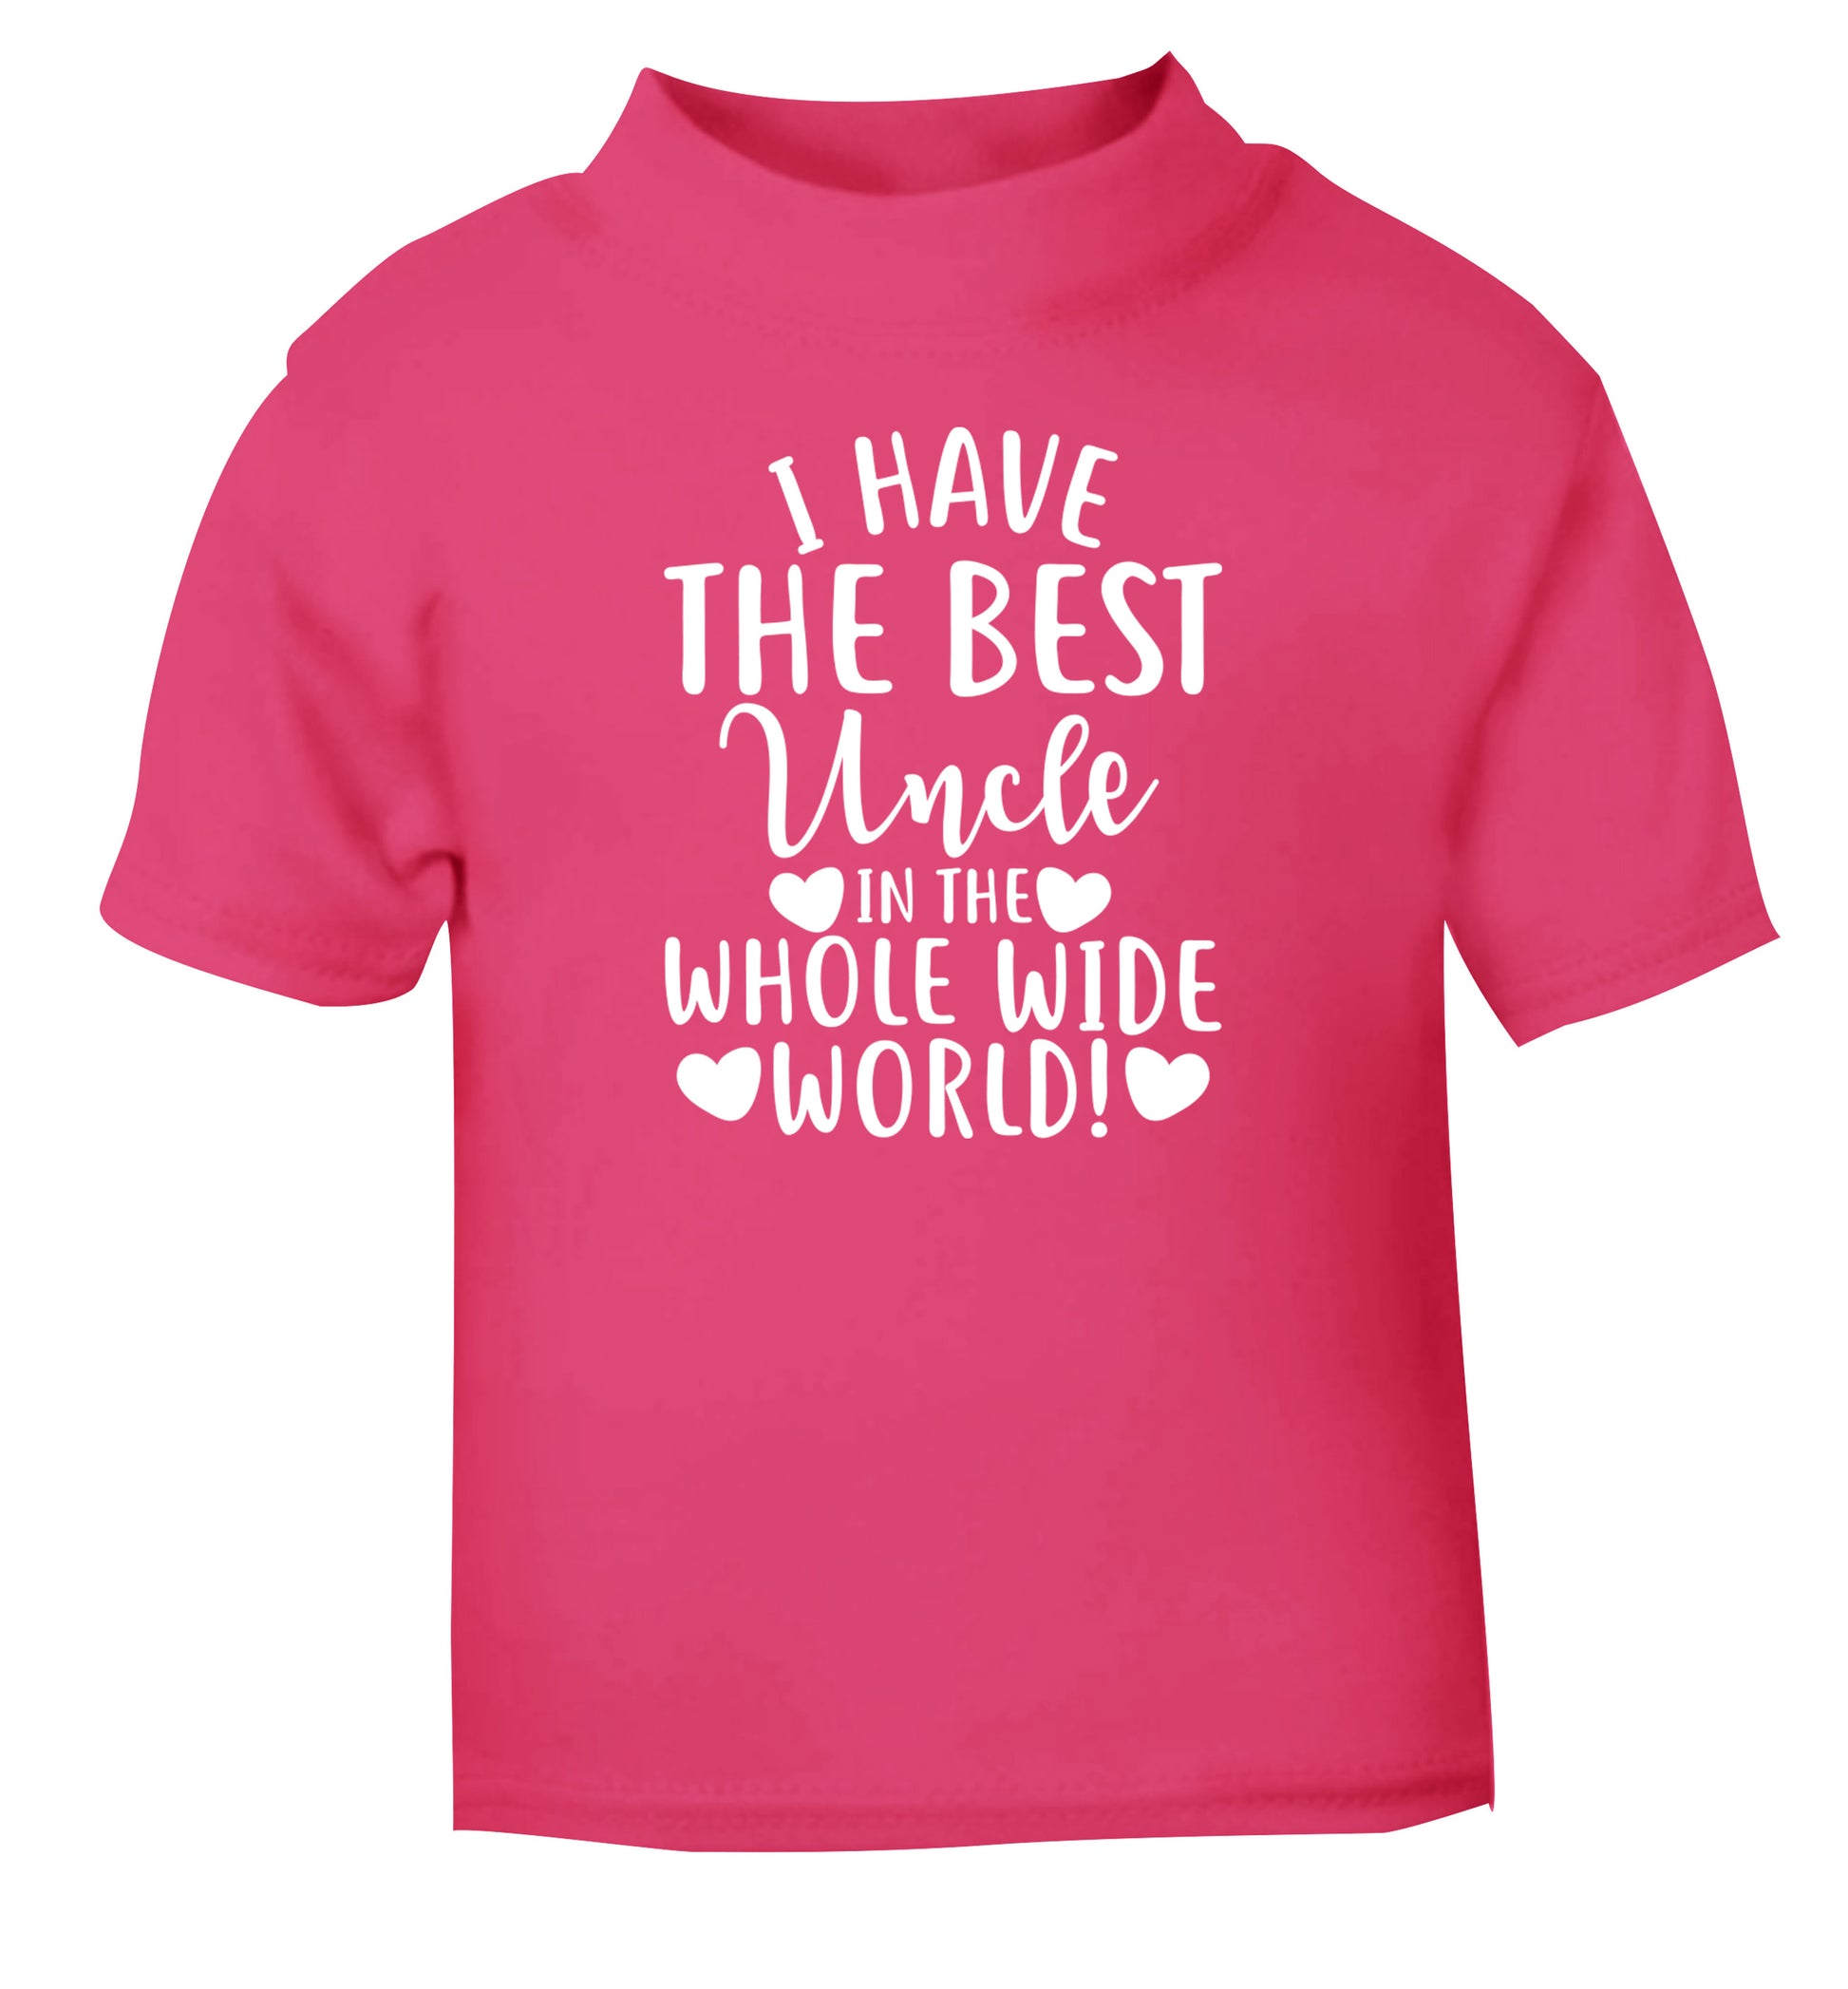 I have the best uncle in the whole wide world! pink Baby Toddler Tshirt 2 Years